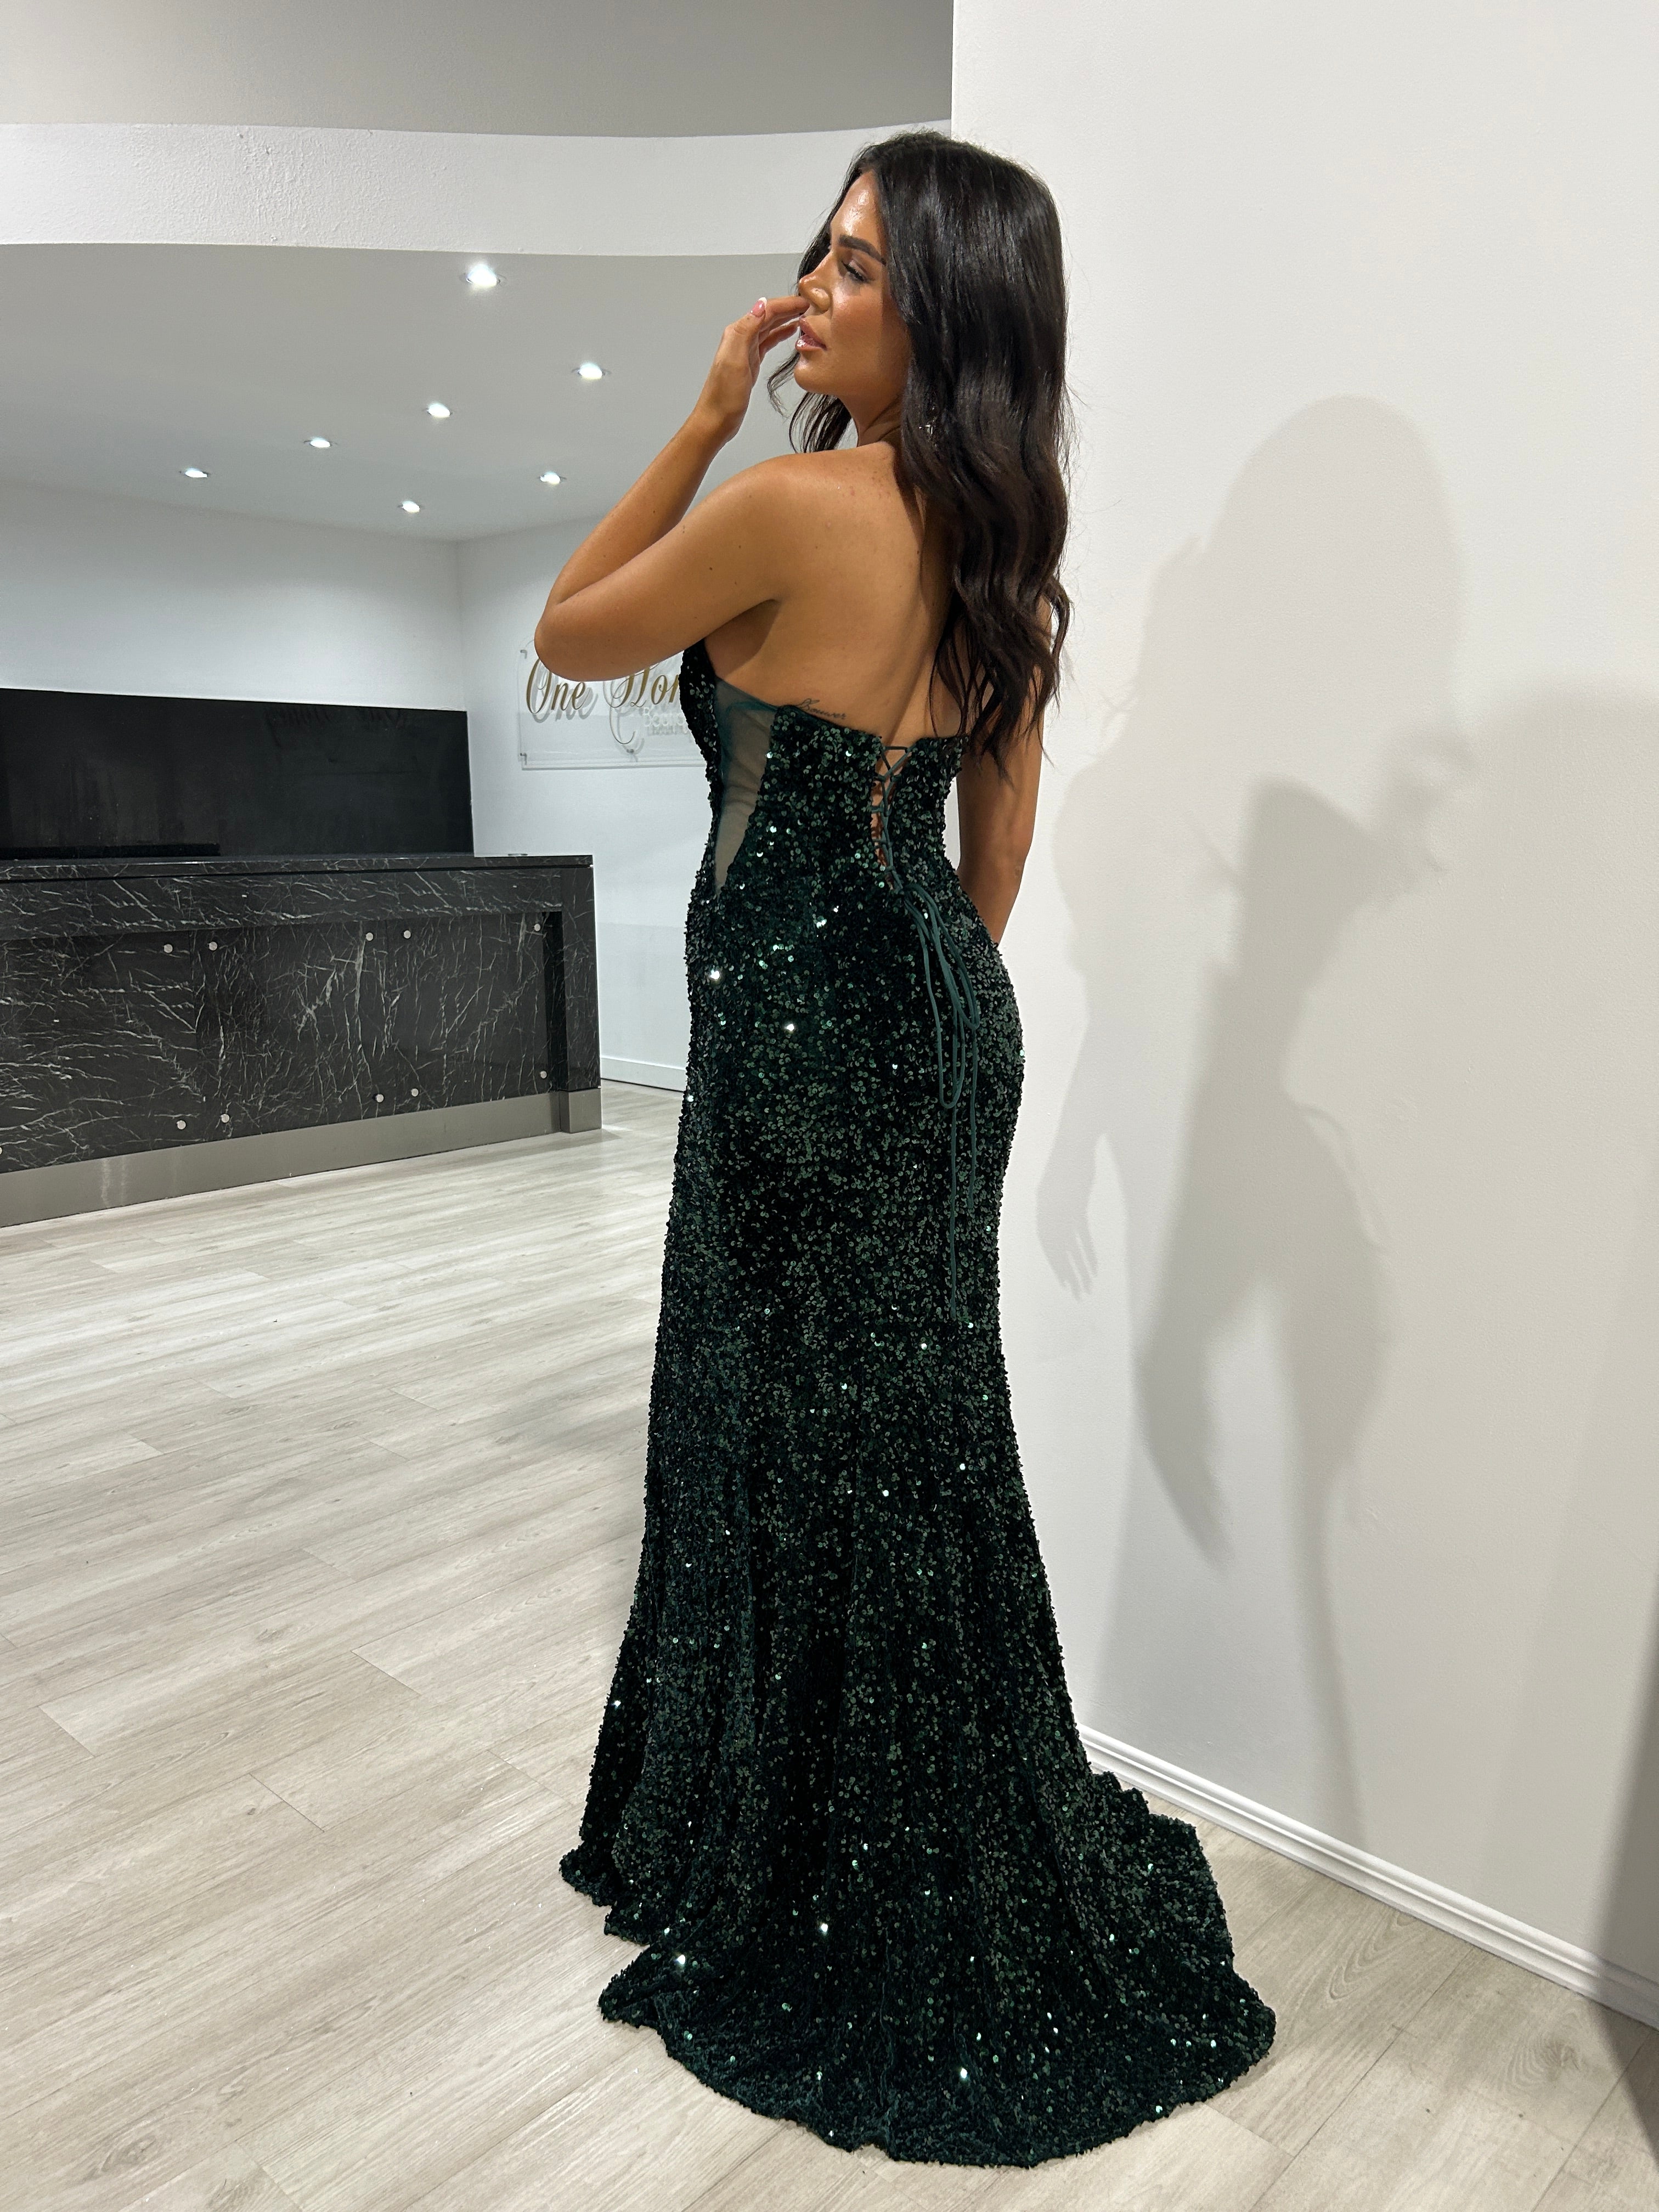 Honey Couture CAMPBELL Emerald Green Sequin Strapless Mermaid Evening Gown Dress